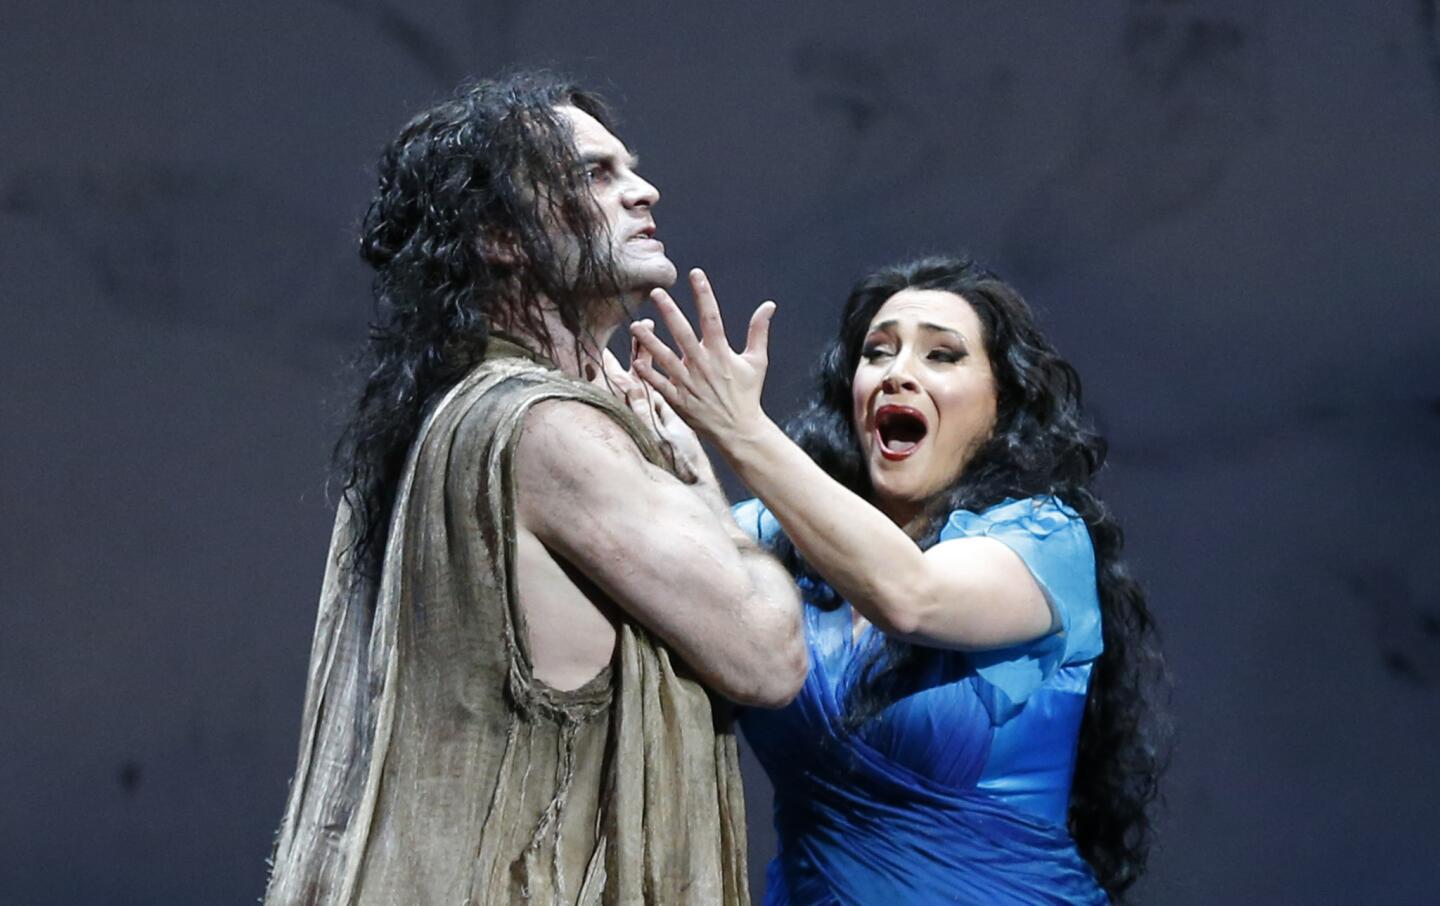 Patricia Racette, right, is Salome, and Tomas Tomasson is Jochanaan in the production of Strauss' "Salome" at the Dorothy Chandler Pavilion in Los Angeles.